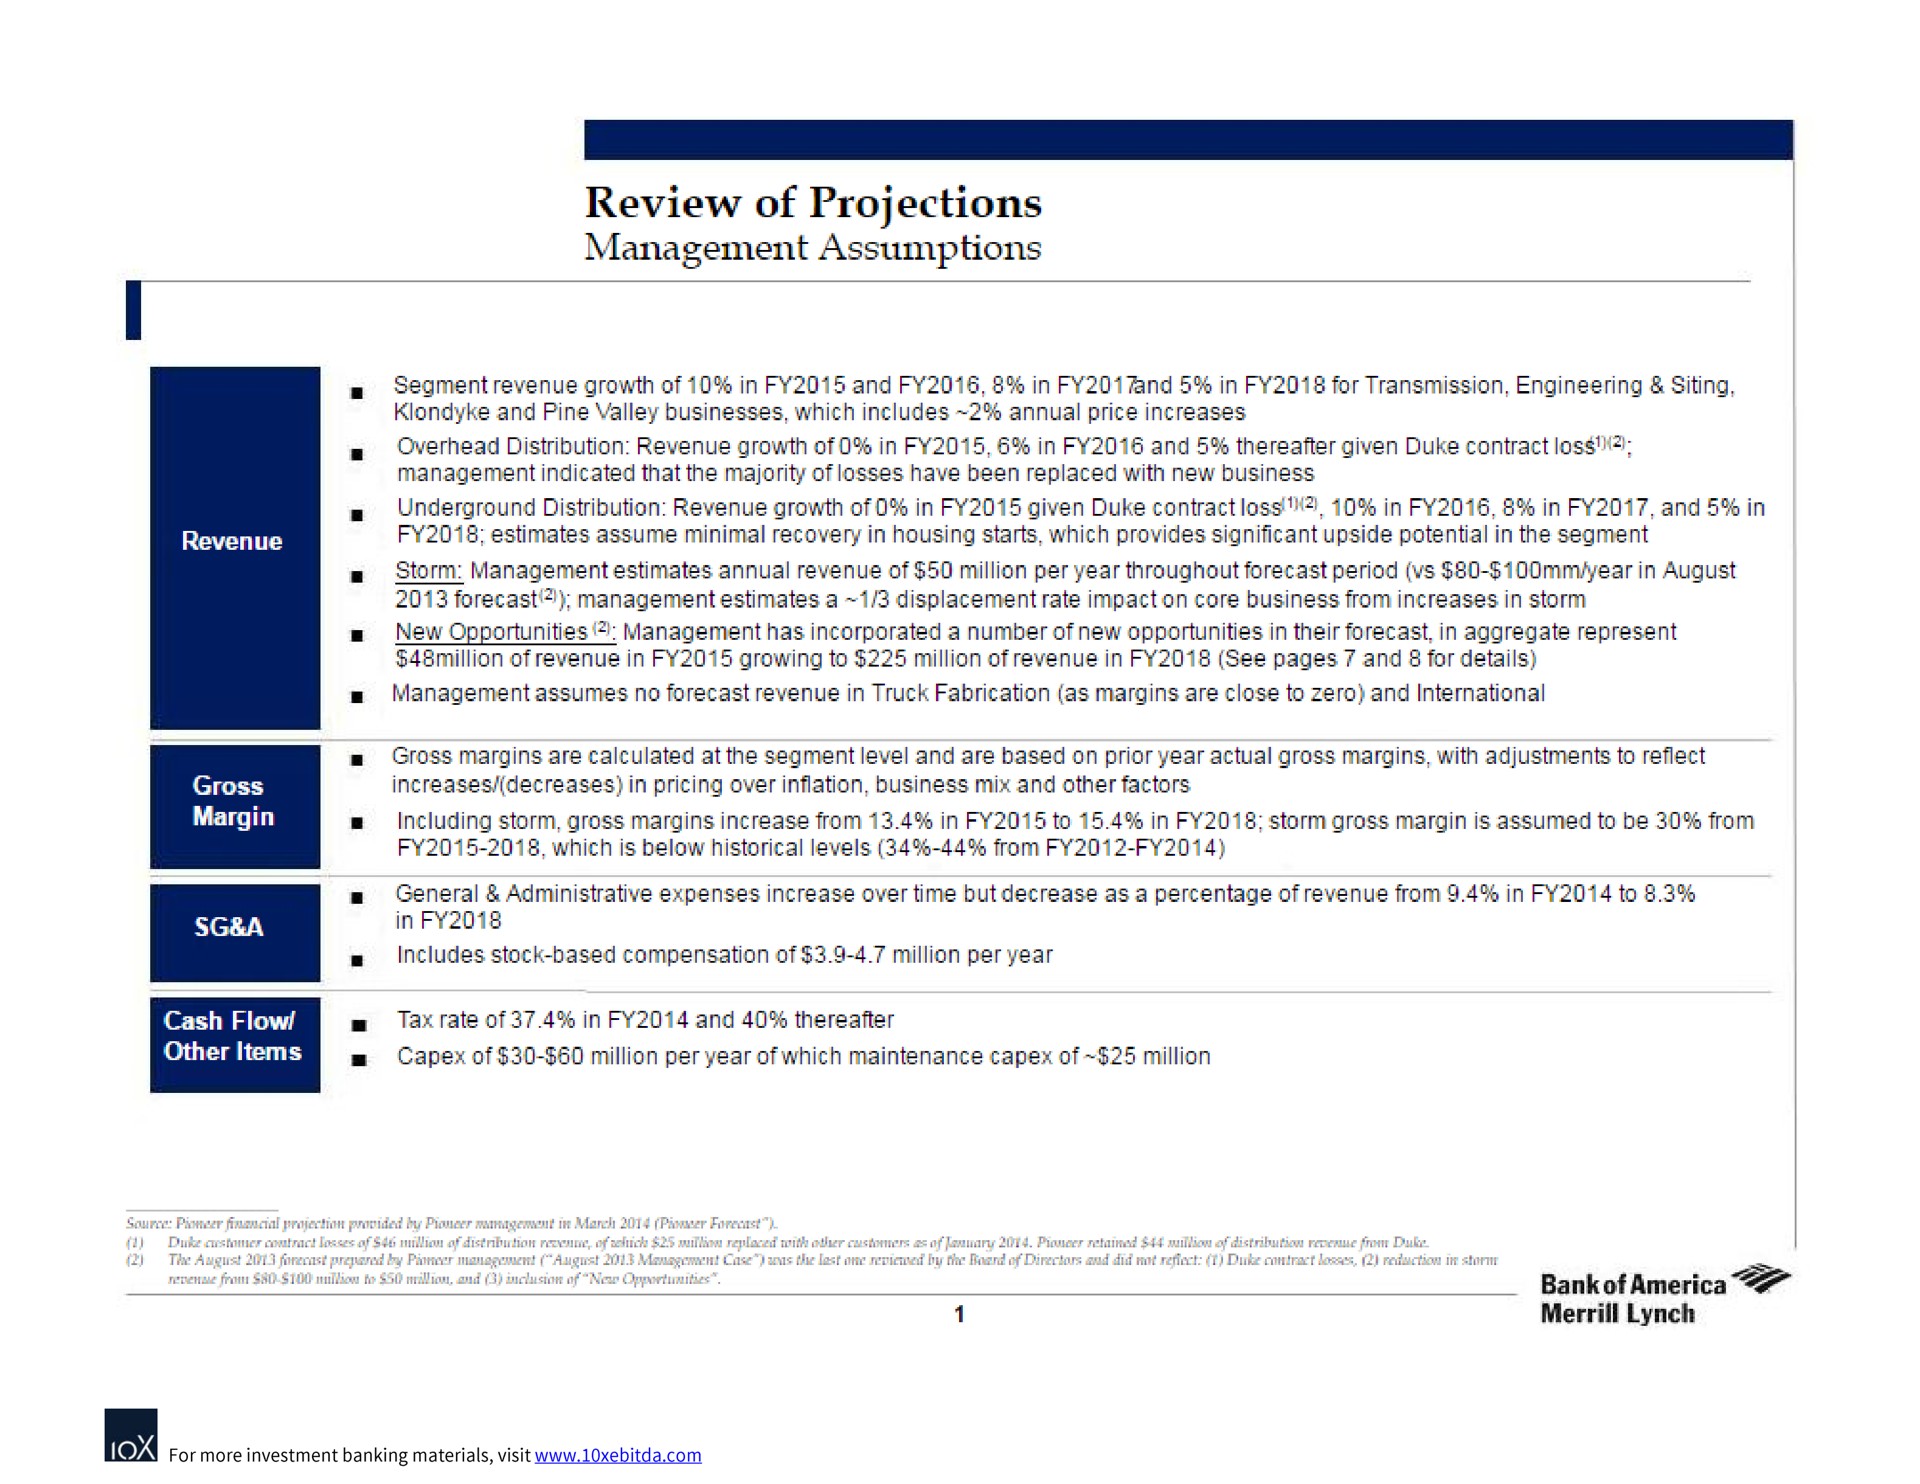 review of projections management assumptions | Bank of America